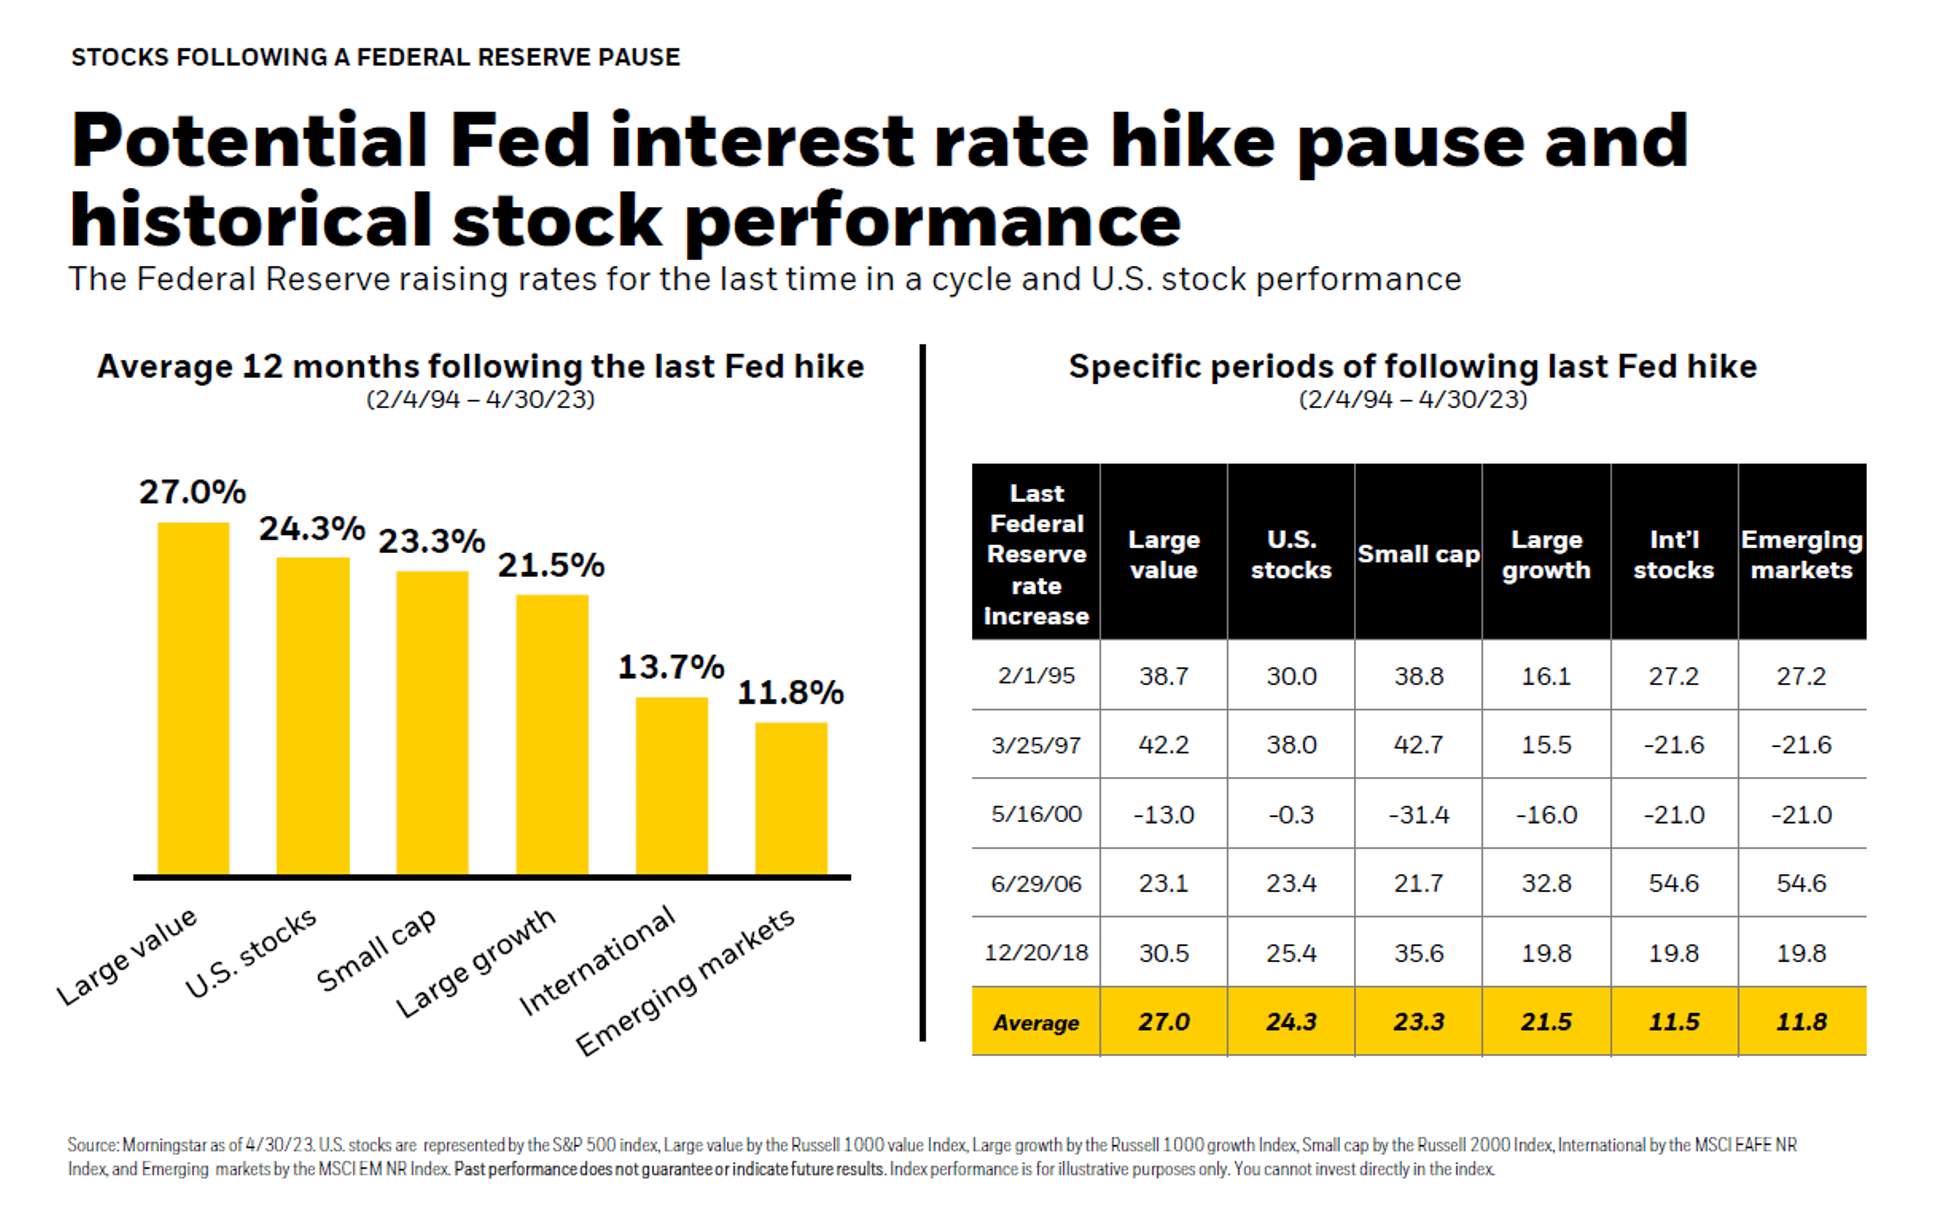 Potential Fed interest rate hike pause and historical stock performance